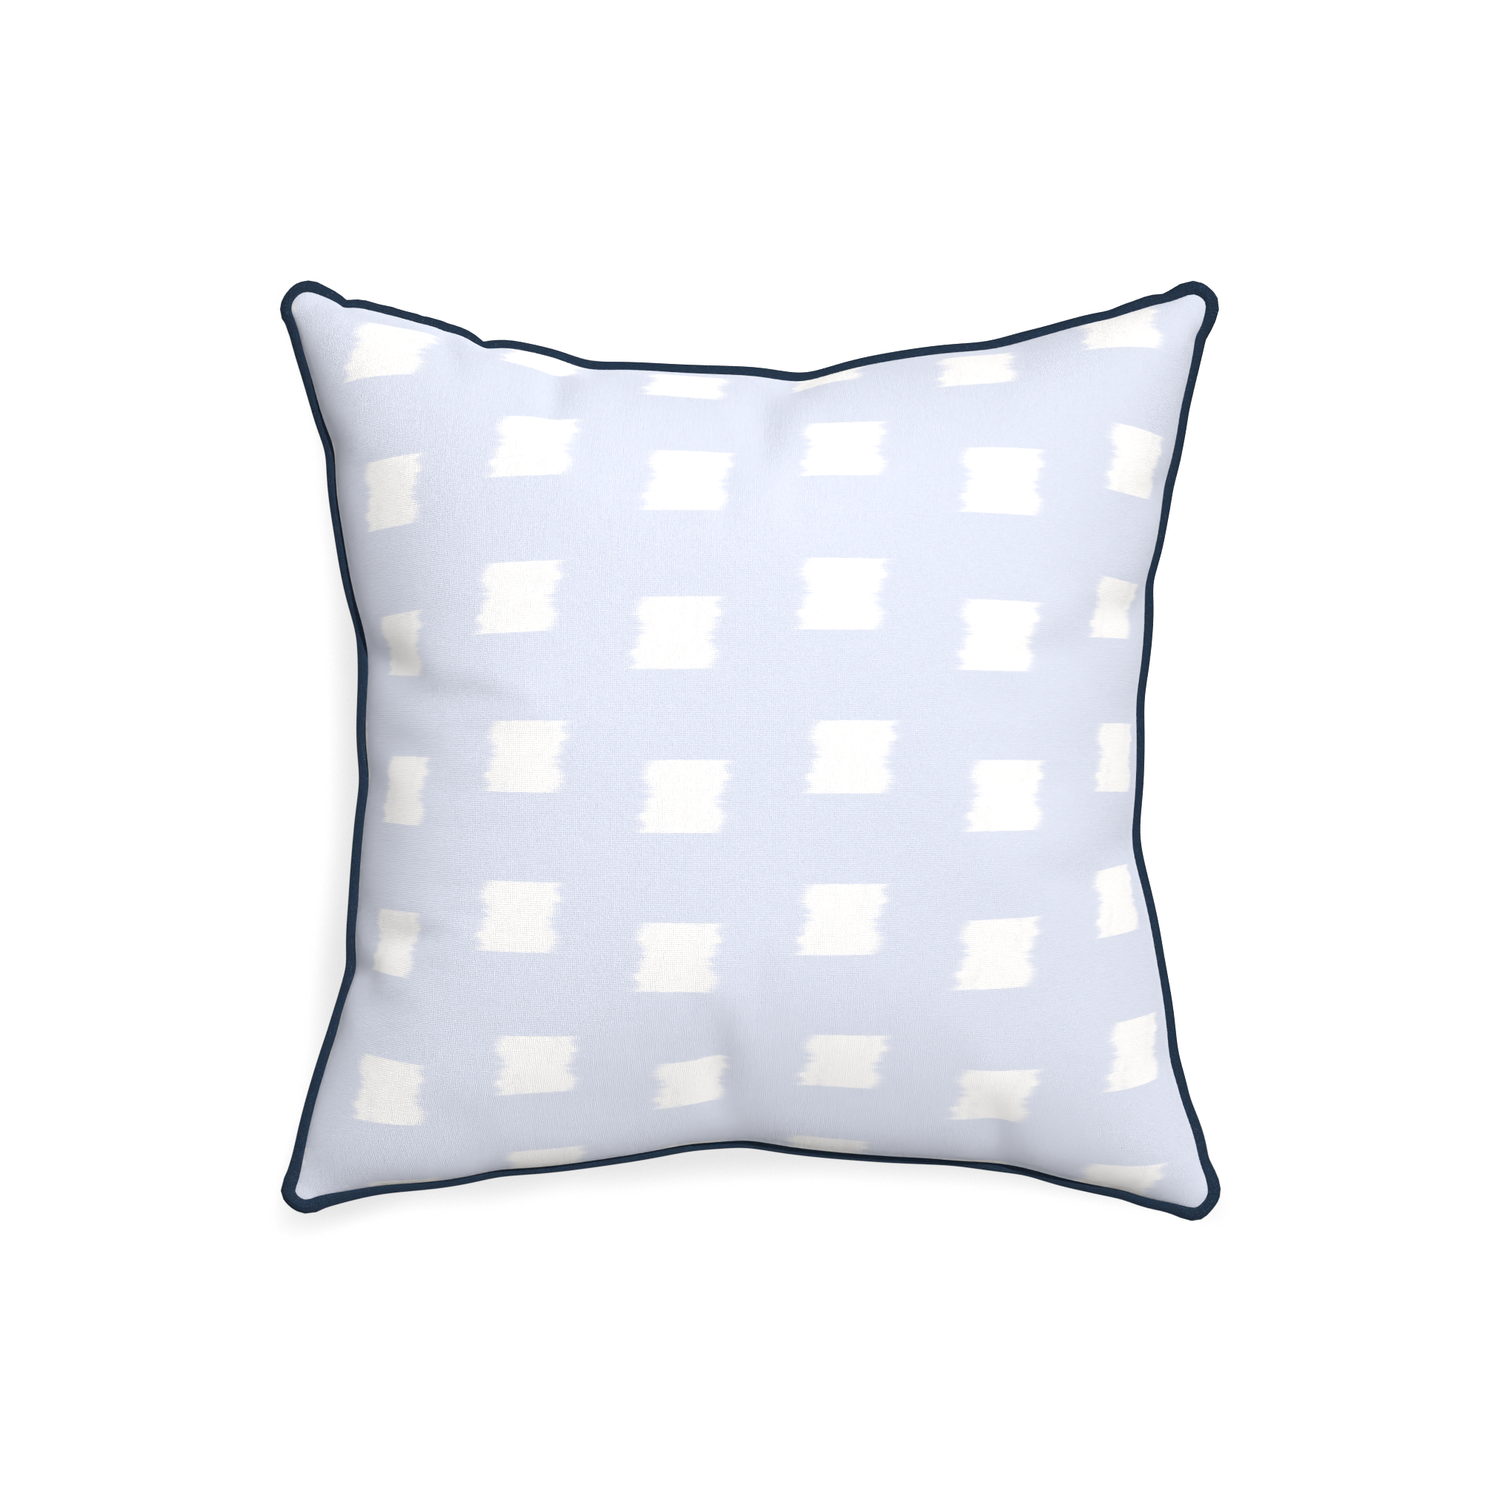 20-square denton custom sky blue patternpillow with c piping on white background